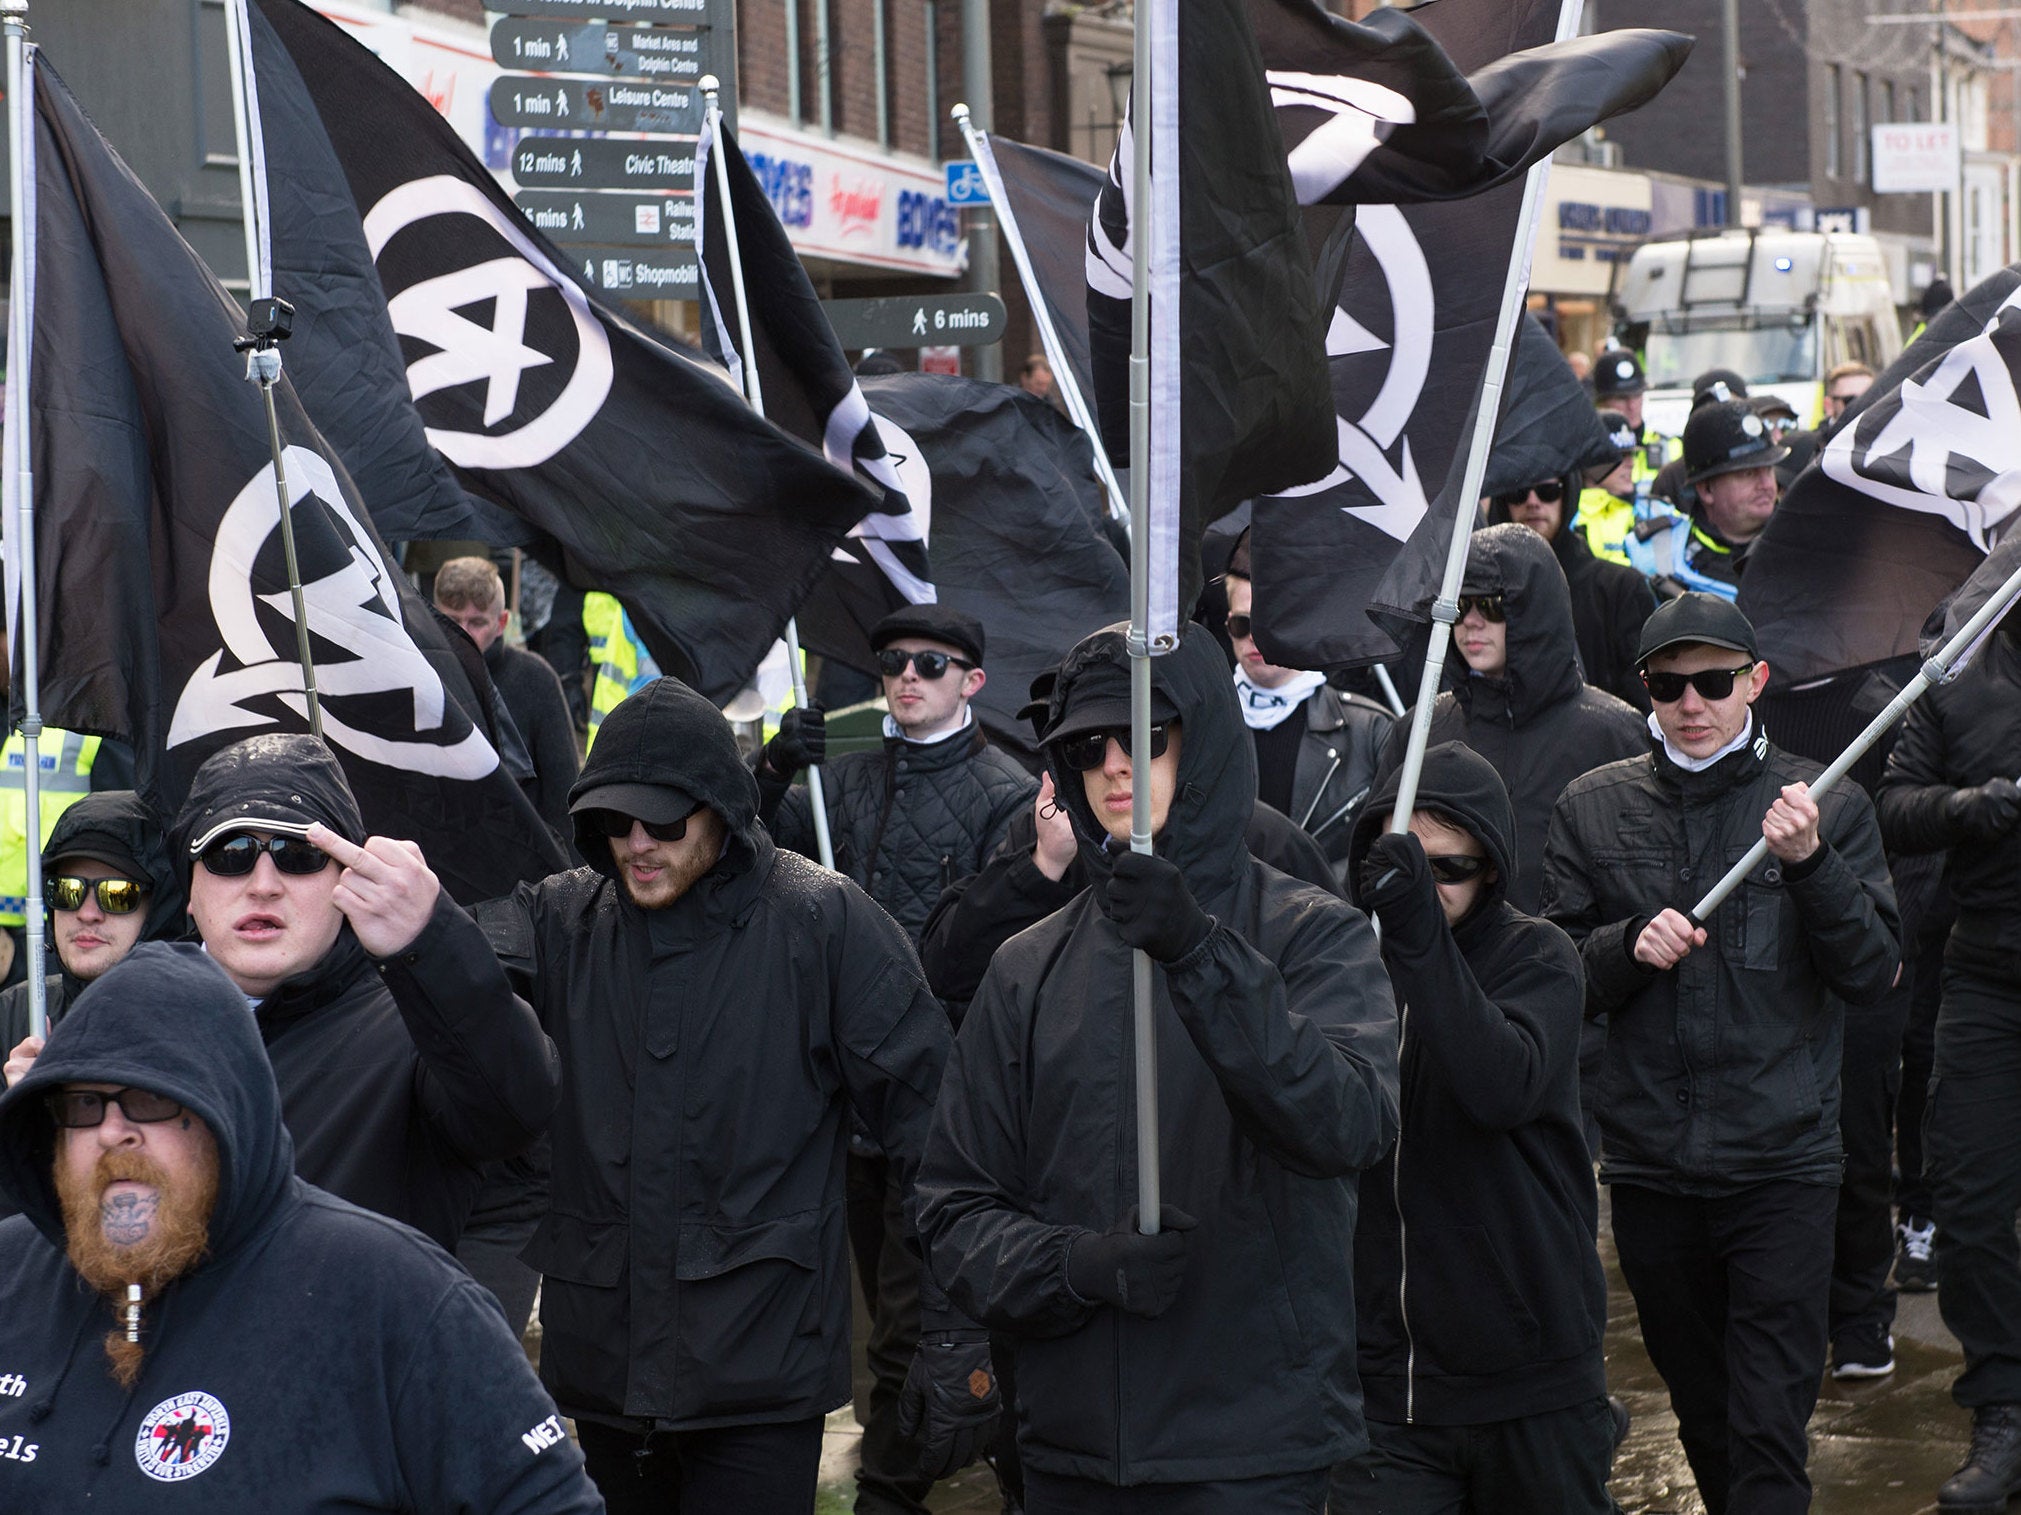 A demonstration joined by National Action members in Darlington in November 2016